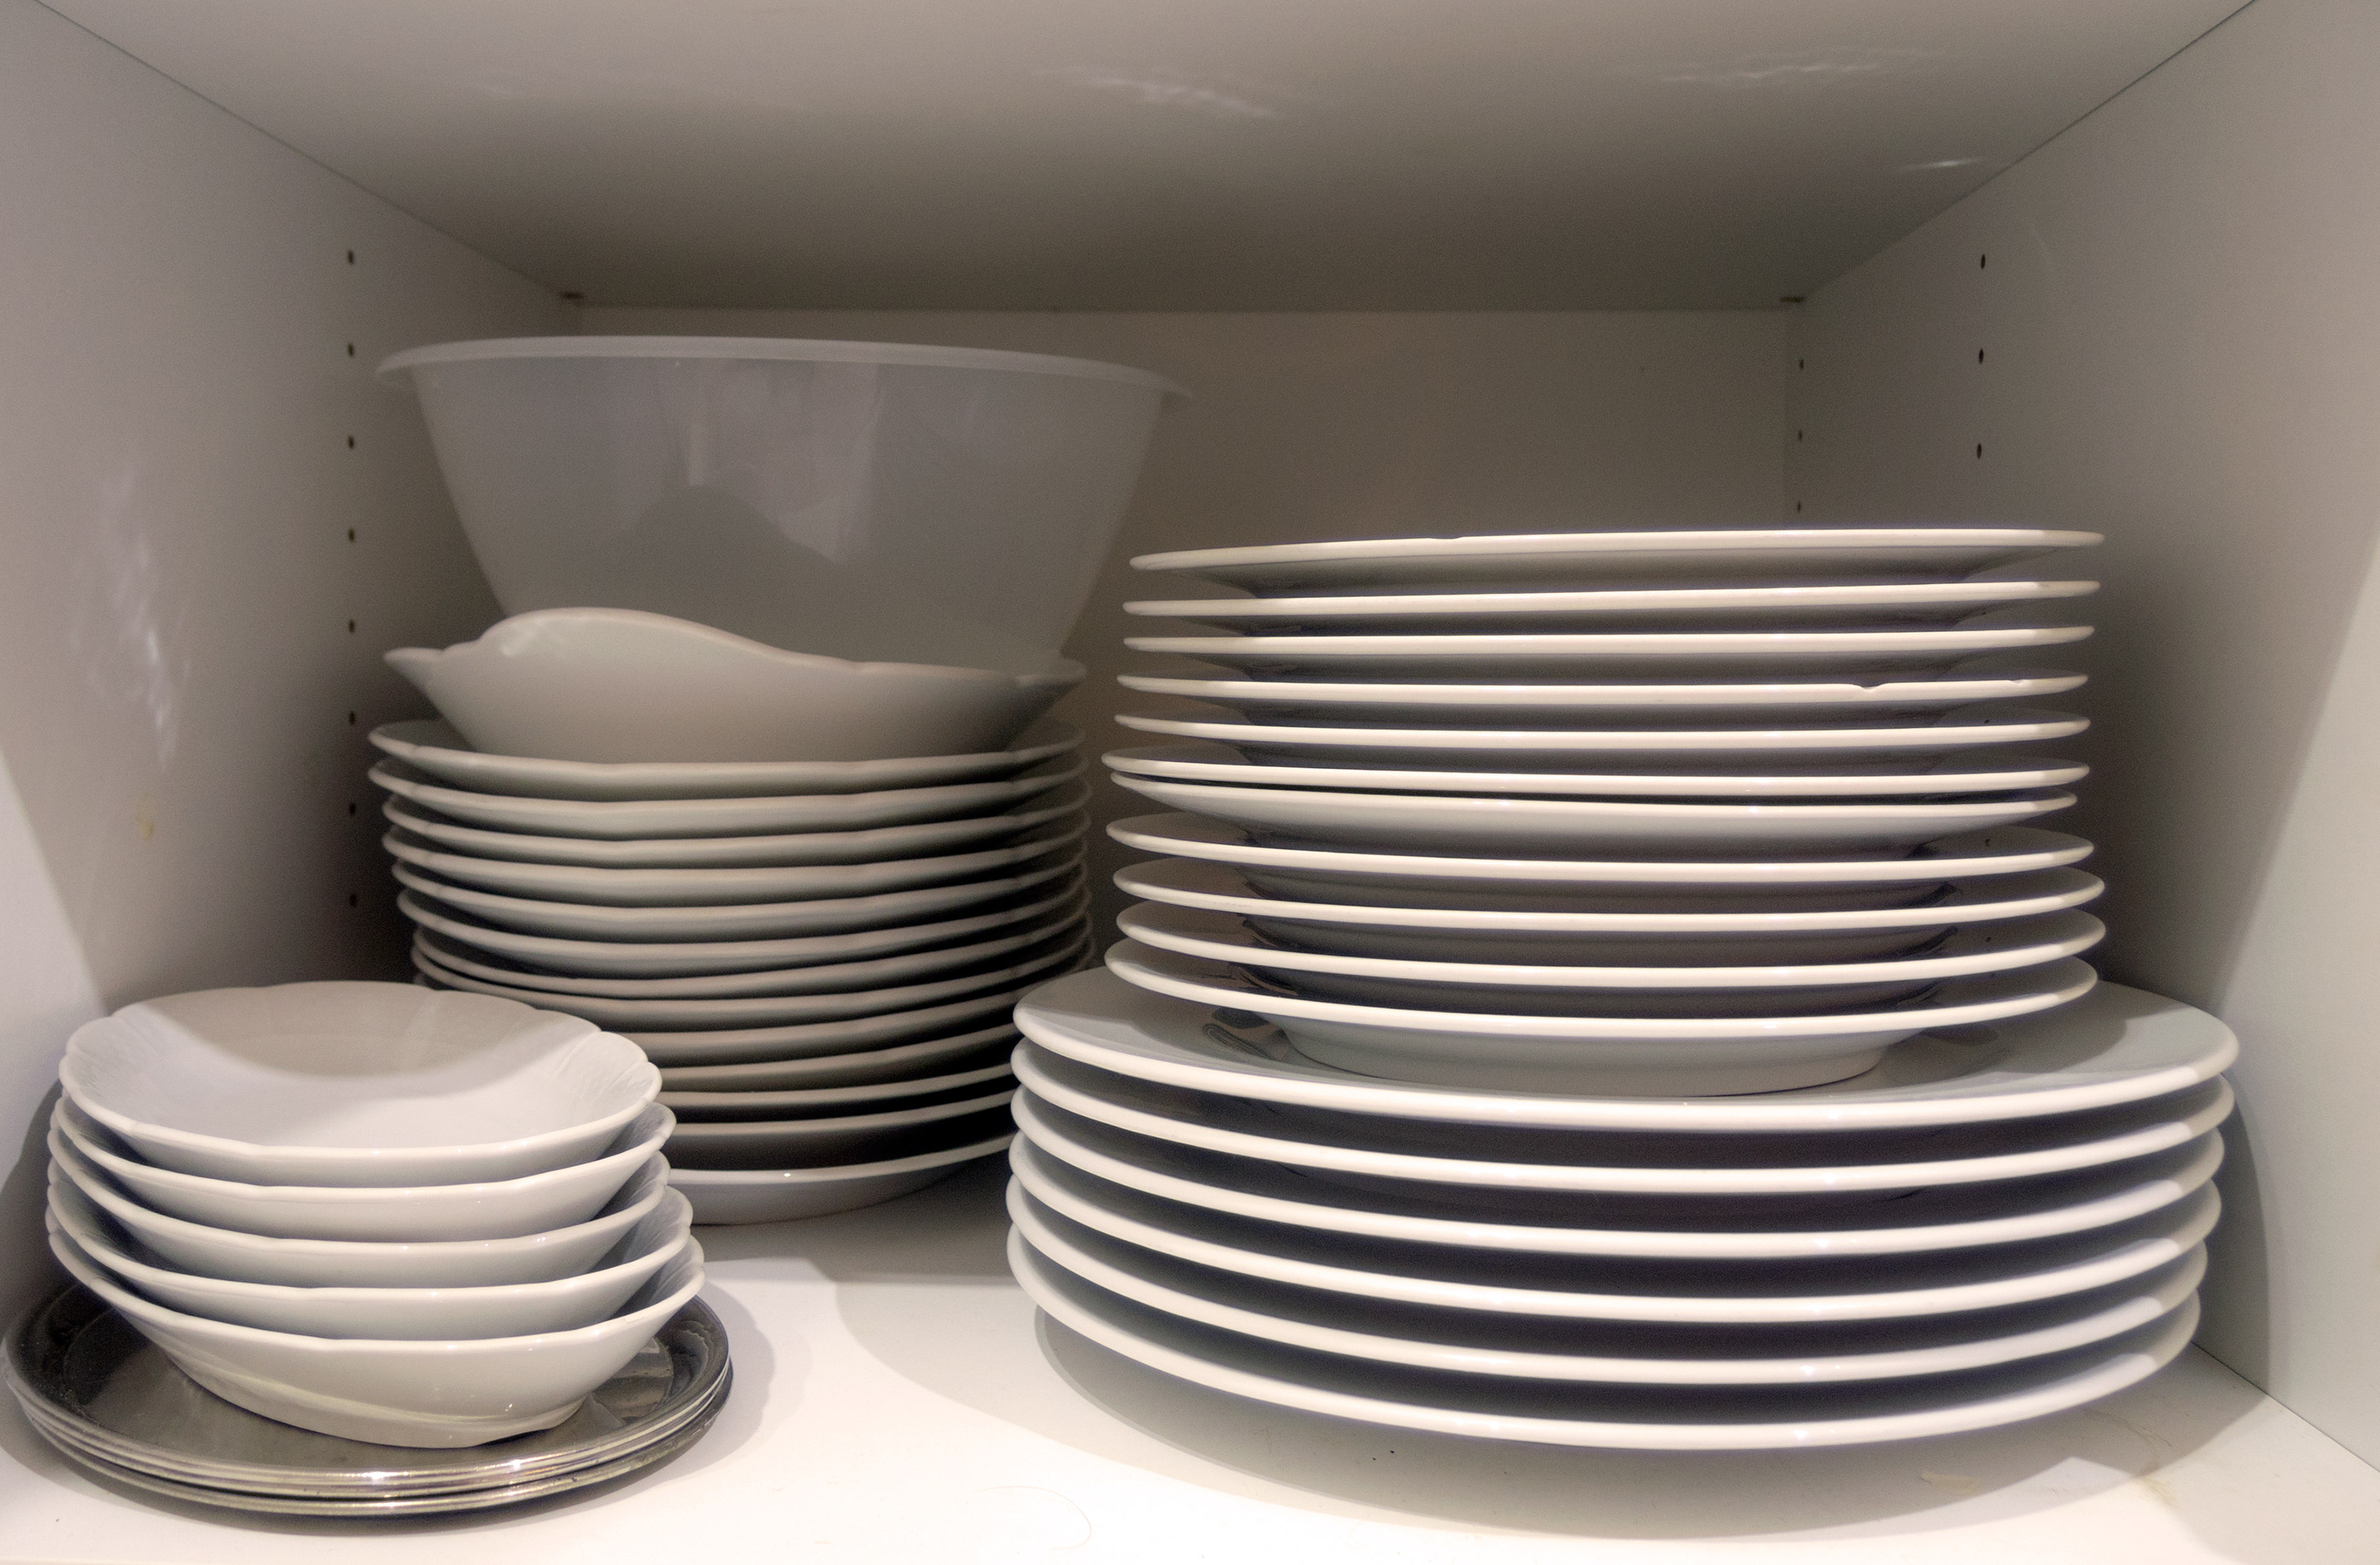 Dishes in cupboard in the kitchen | FREE image on LibreShot
